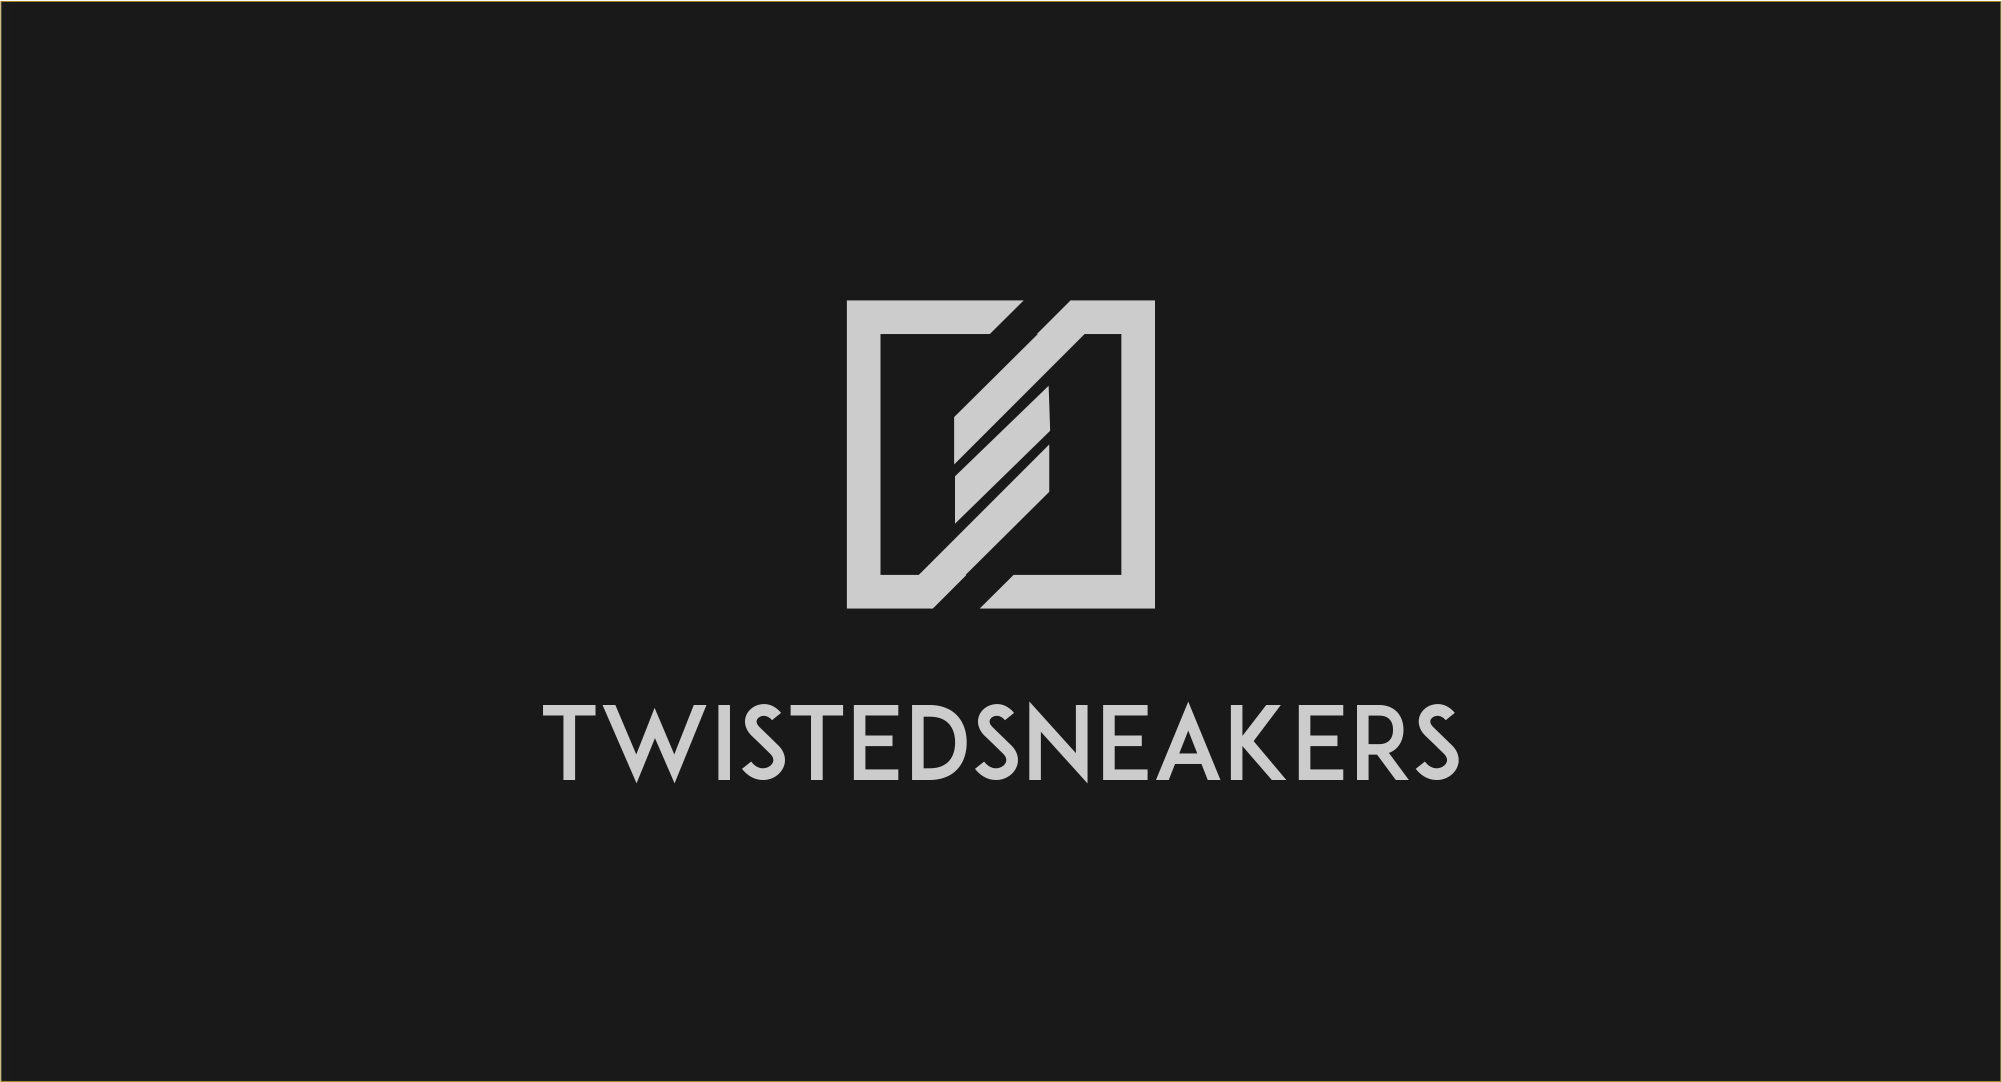 Twisted sneakers creative design